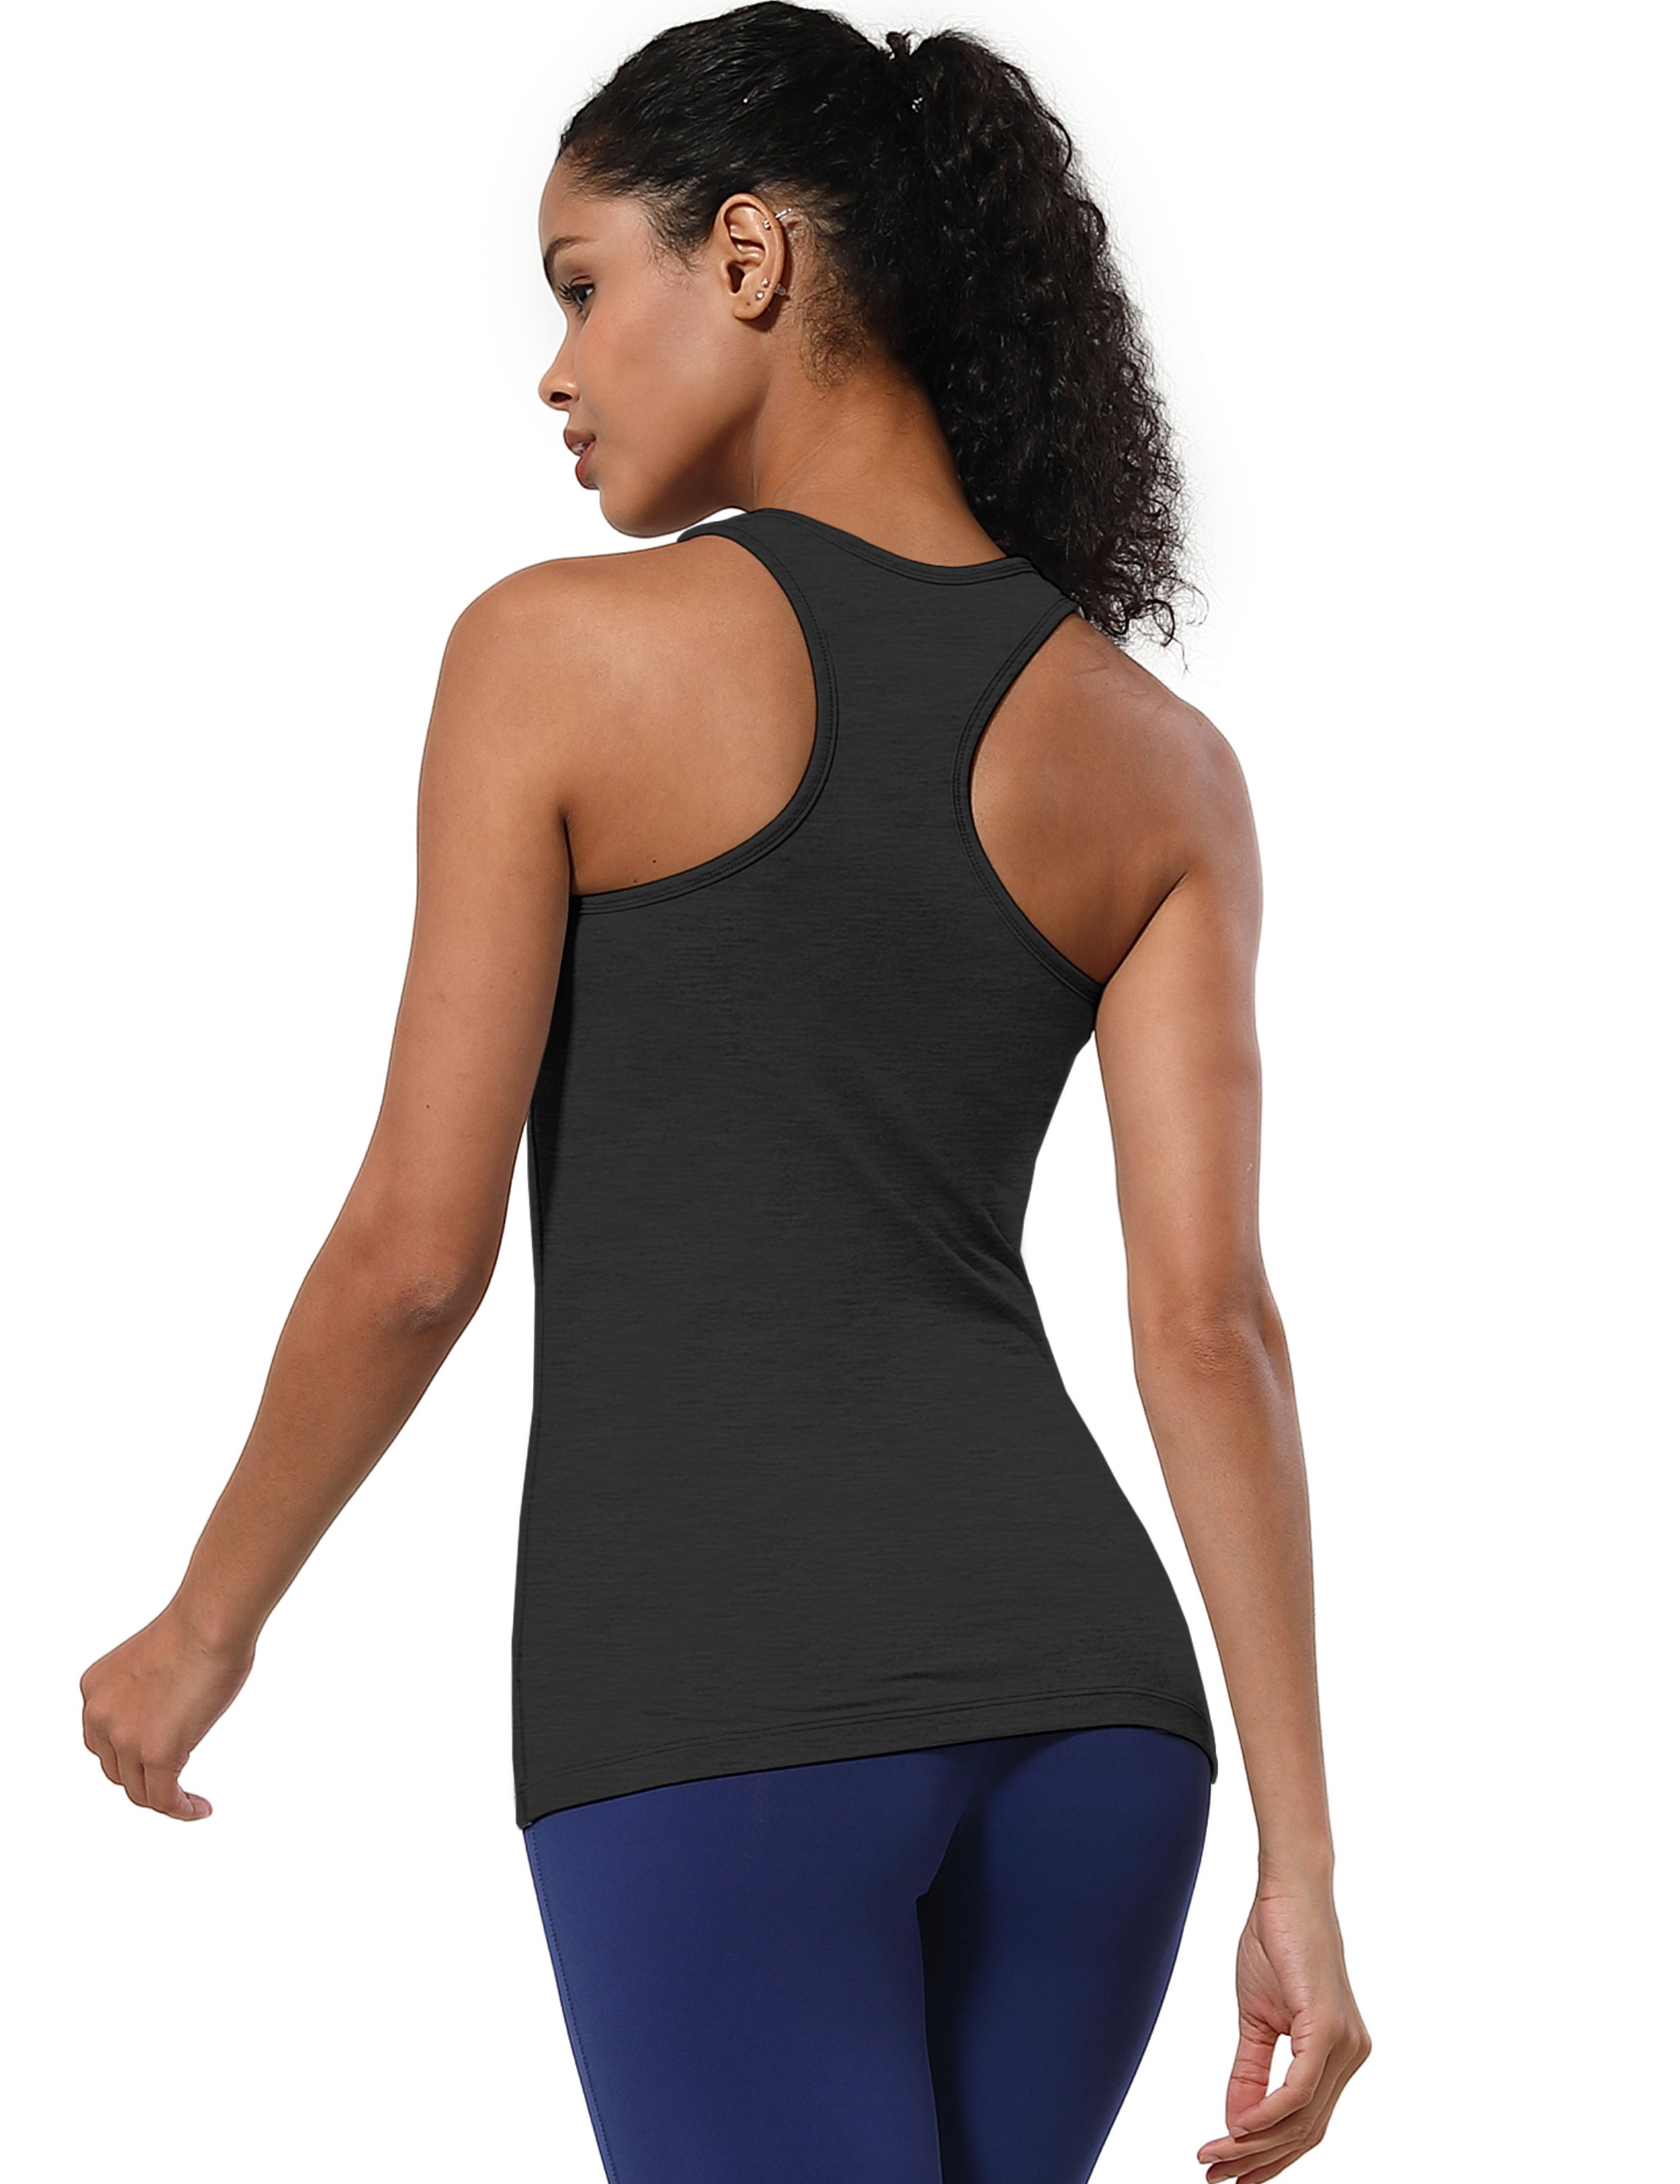 Racerback Athletic Tank Tops heathercharcoal 92%Nylon/8%Spandex(Cotton Soft) Designed for Yoga Tight Fit So buttery soft, it feels weightless Sweat-wicking Four-way stretch Breathable Contours your body Sits below the waistband for moderate, everyday coverage